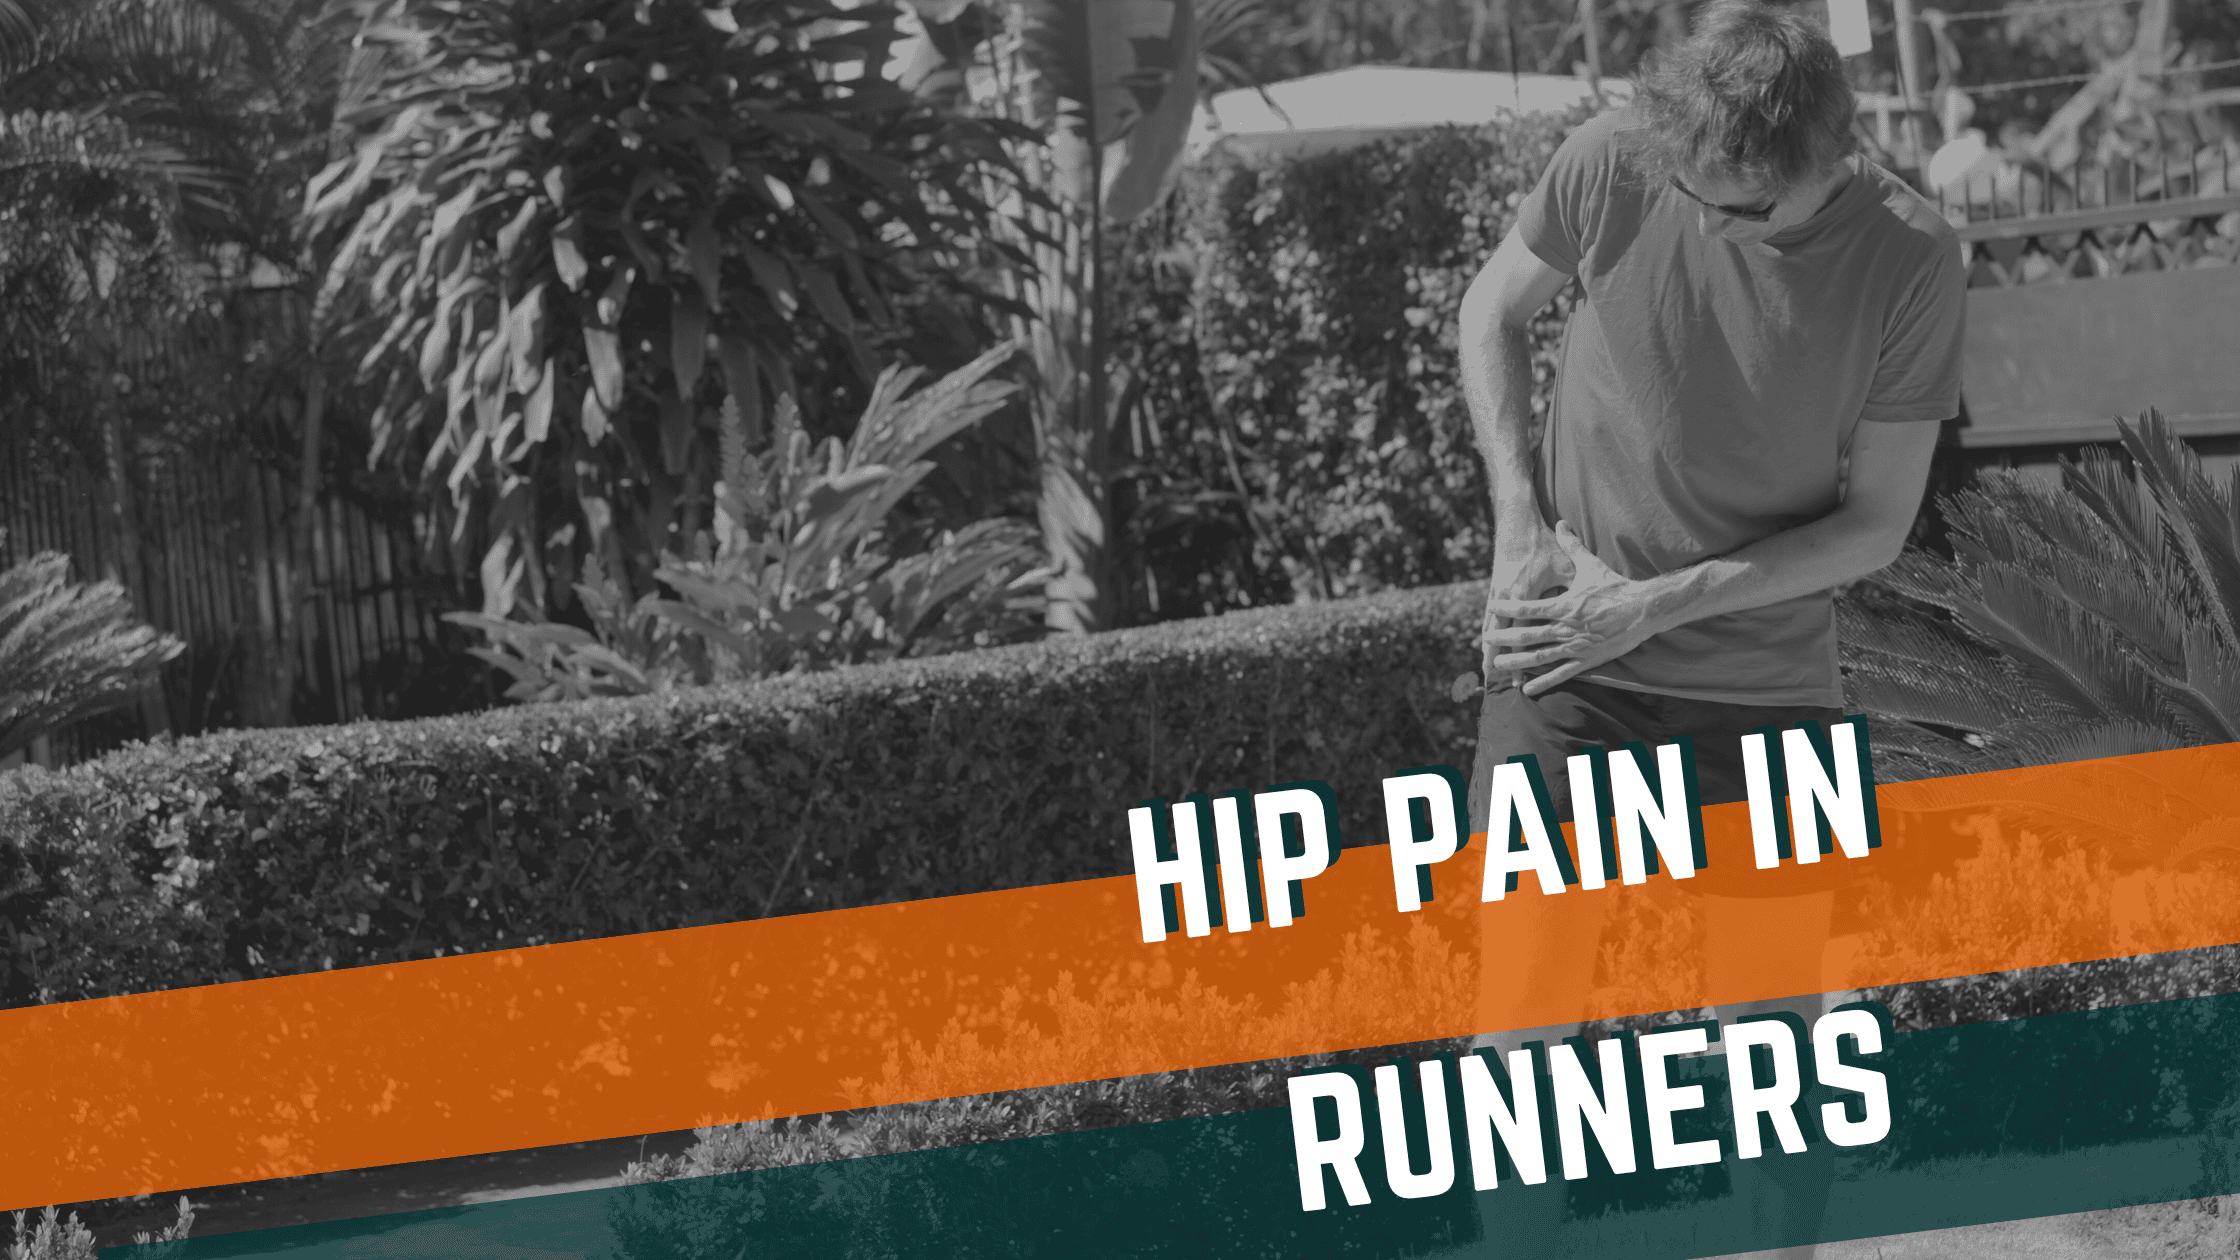 Featured image for “Hip Pain in Runners”